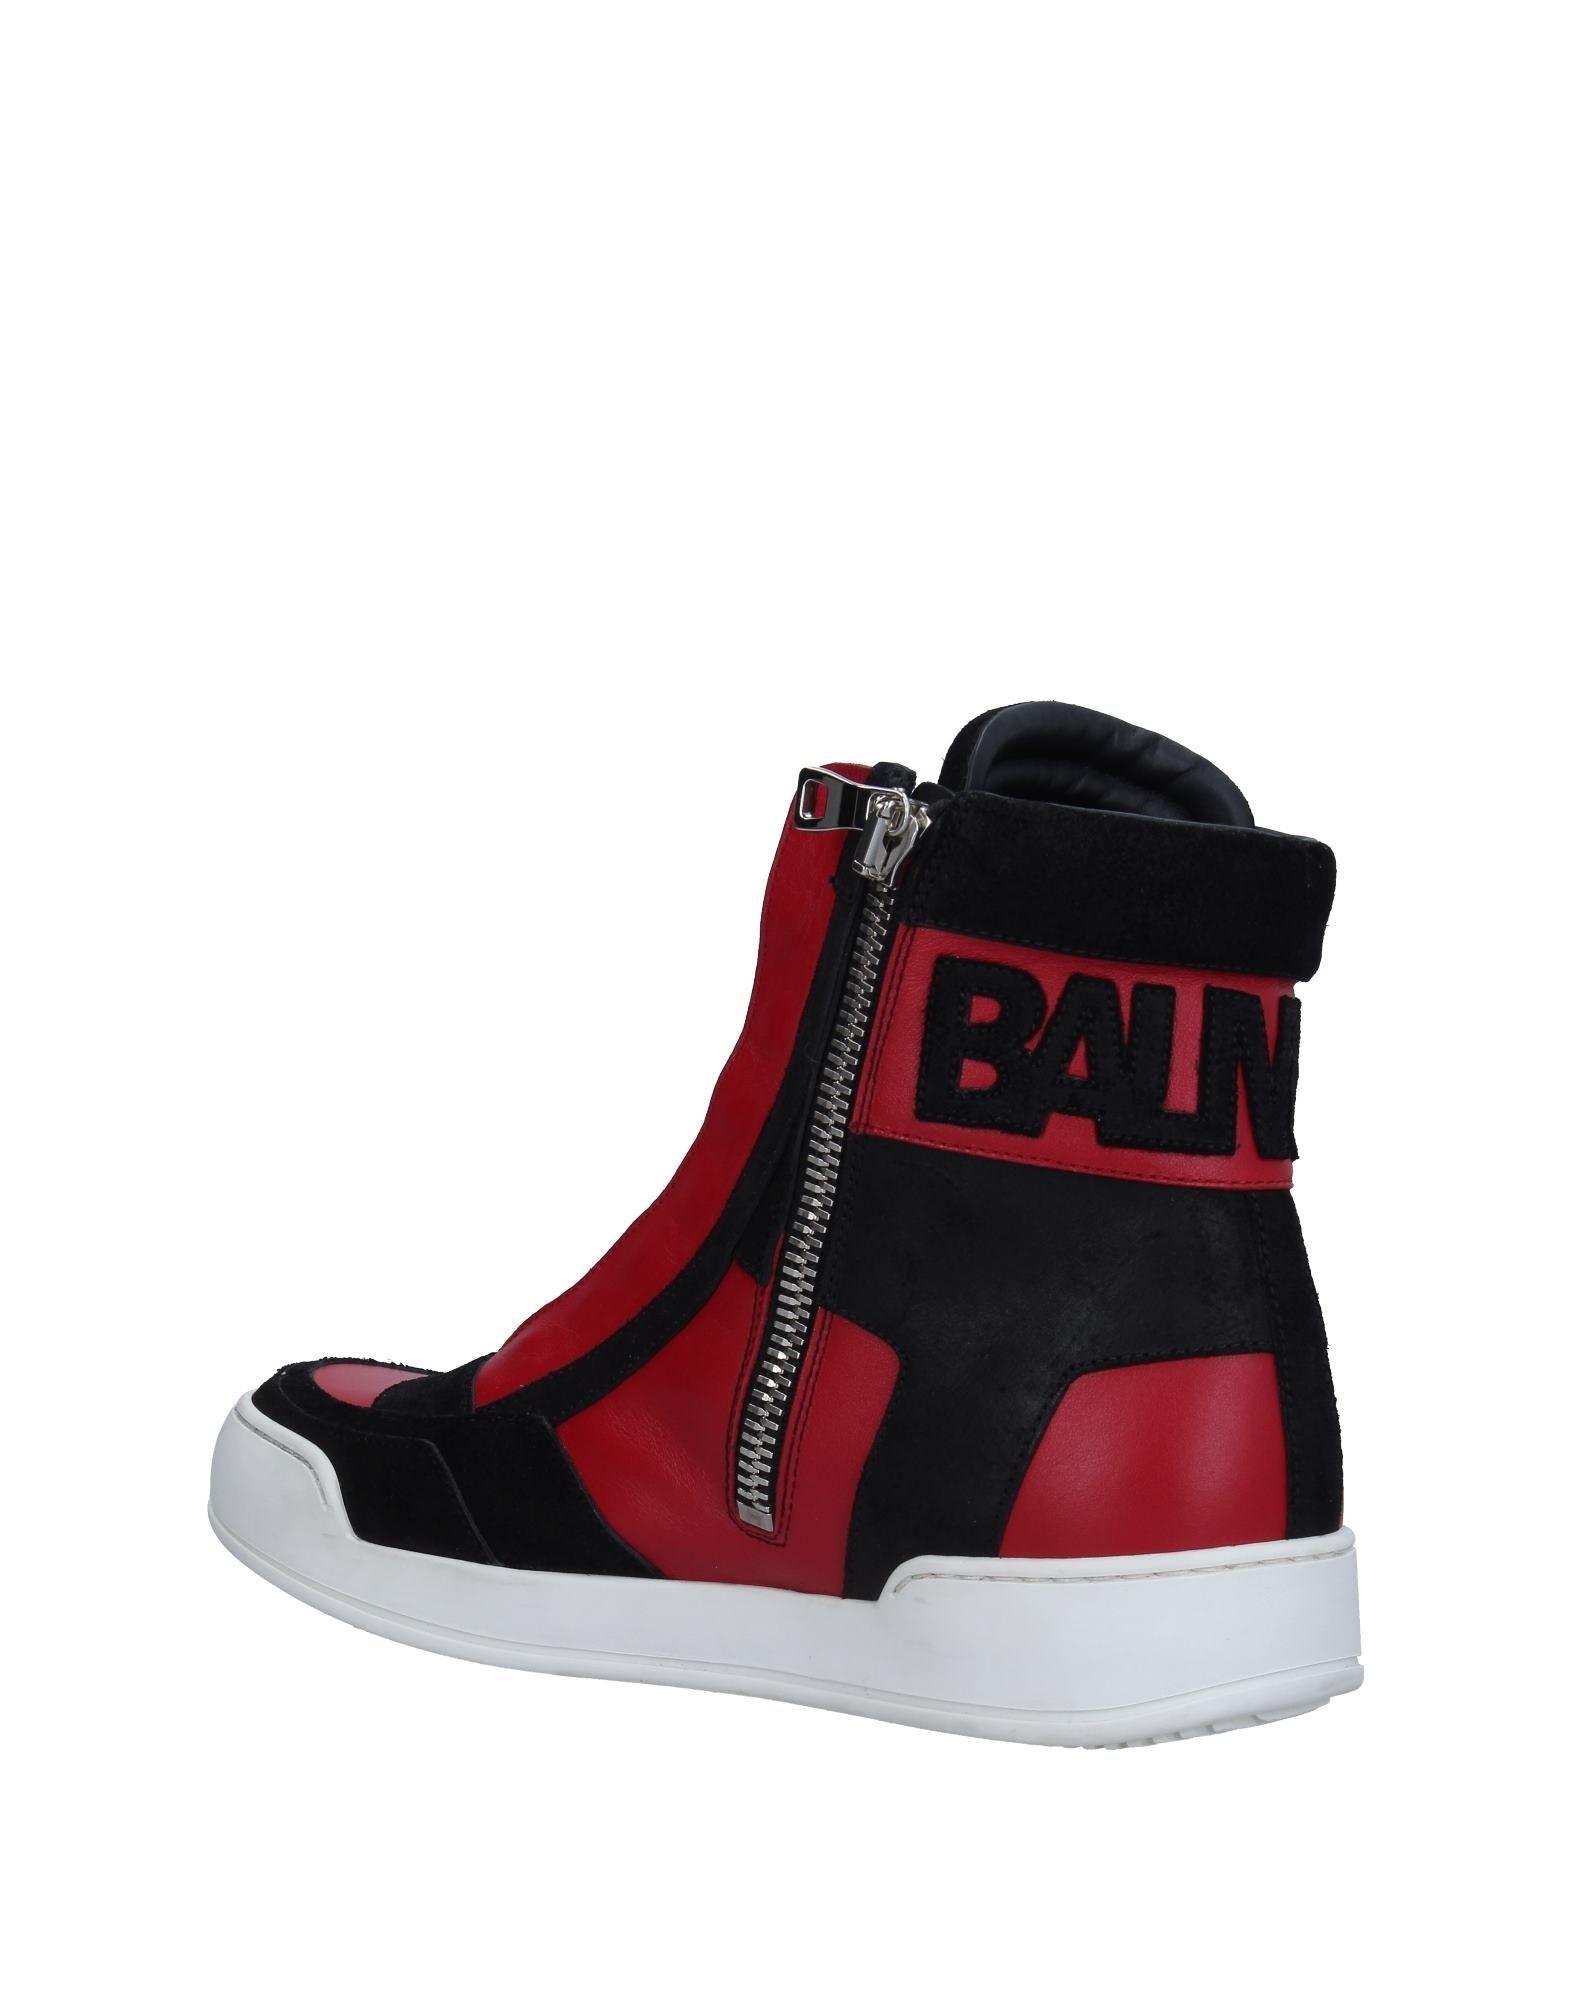 Balmain Leather High-tops & Sneakers in Red for Men - Lyst